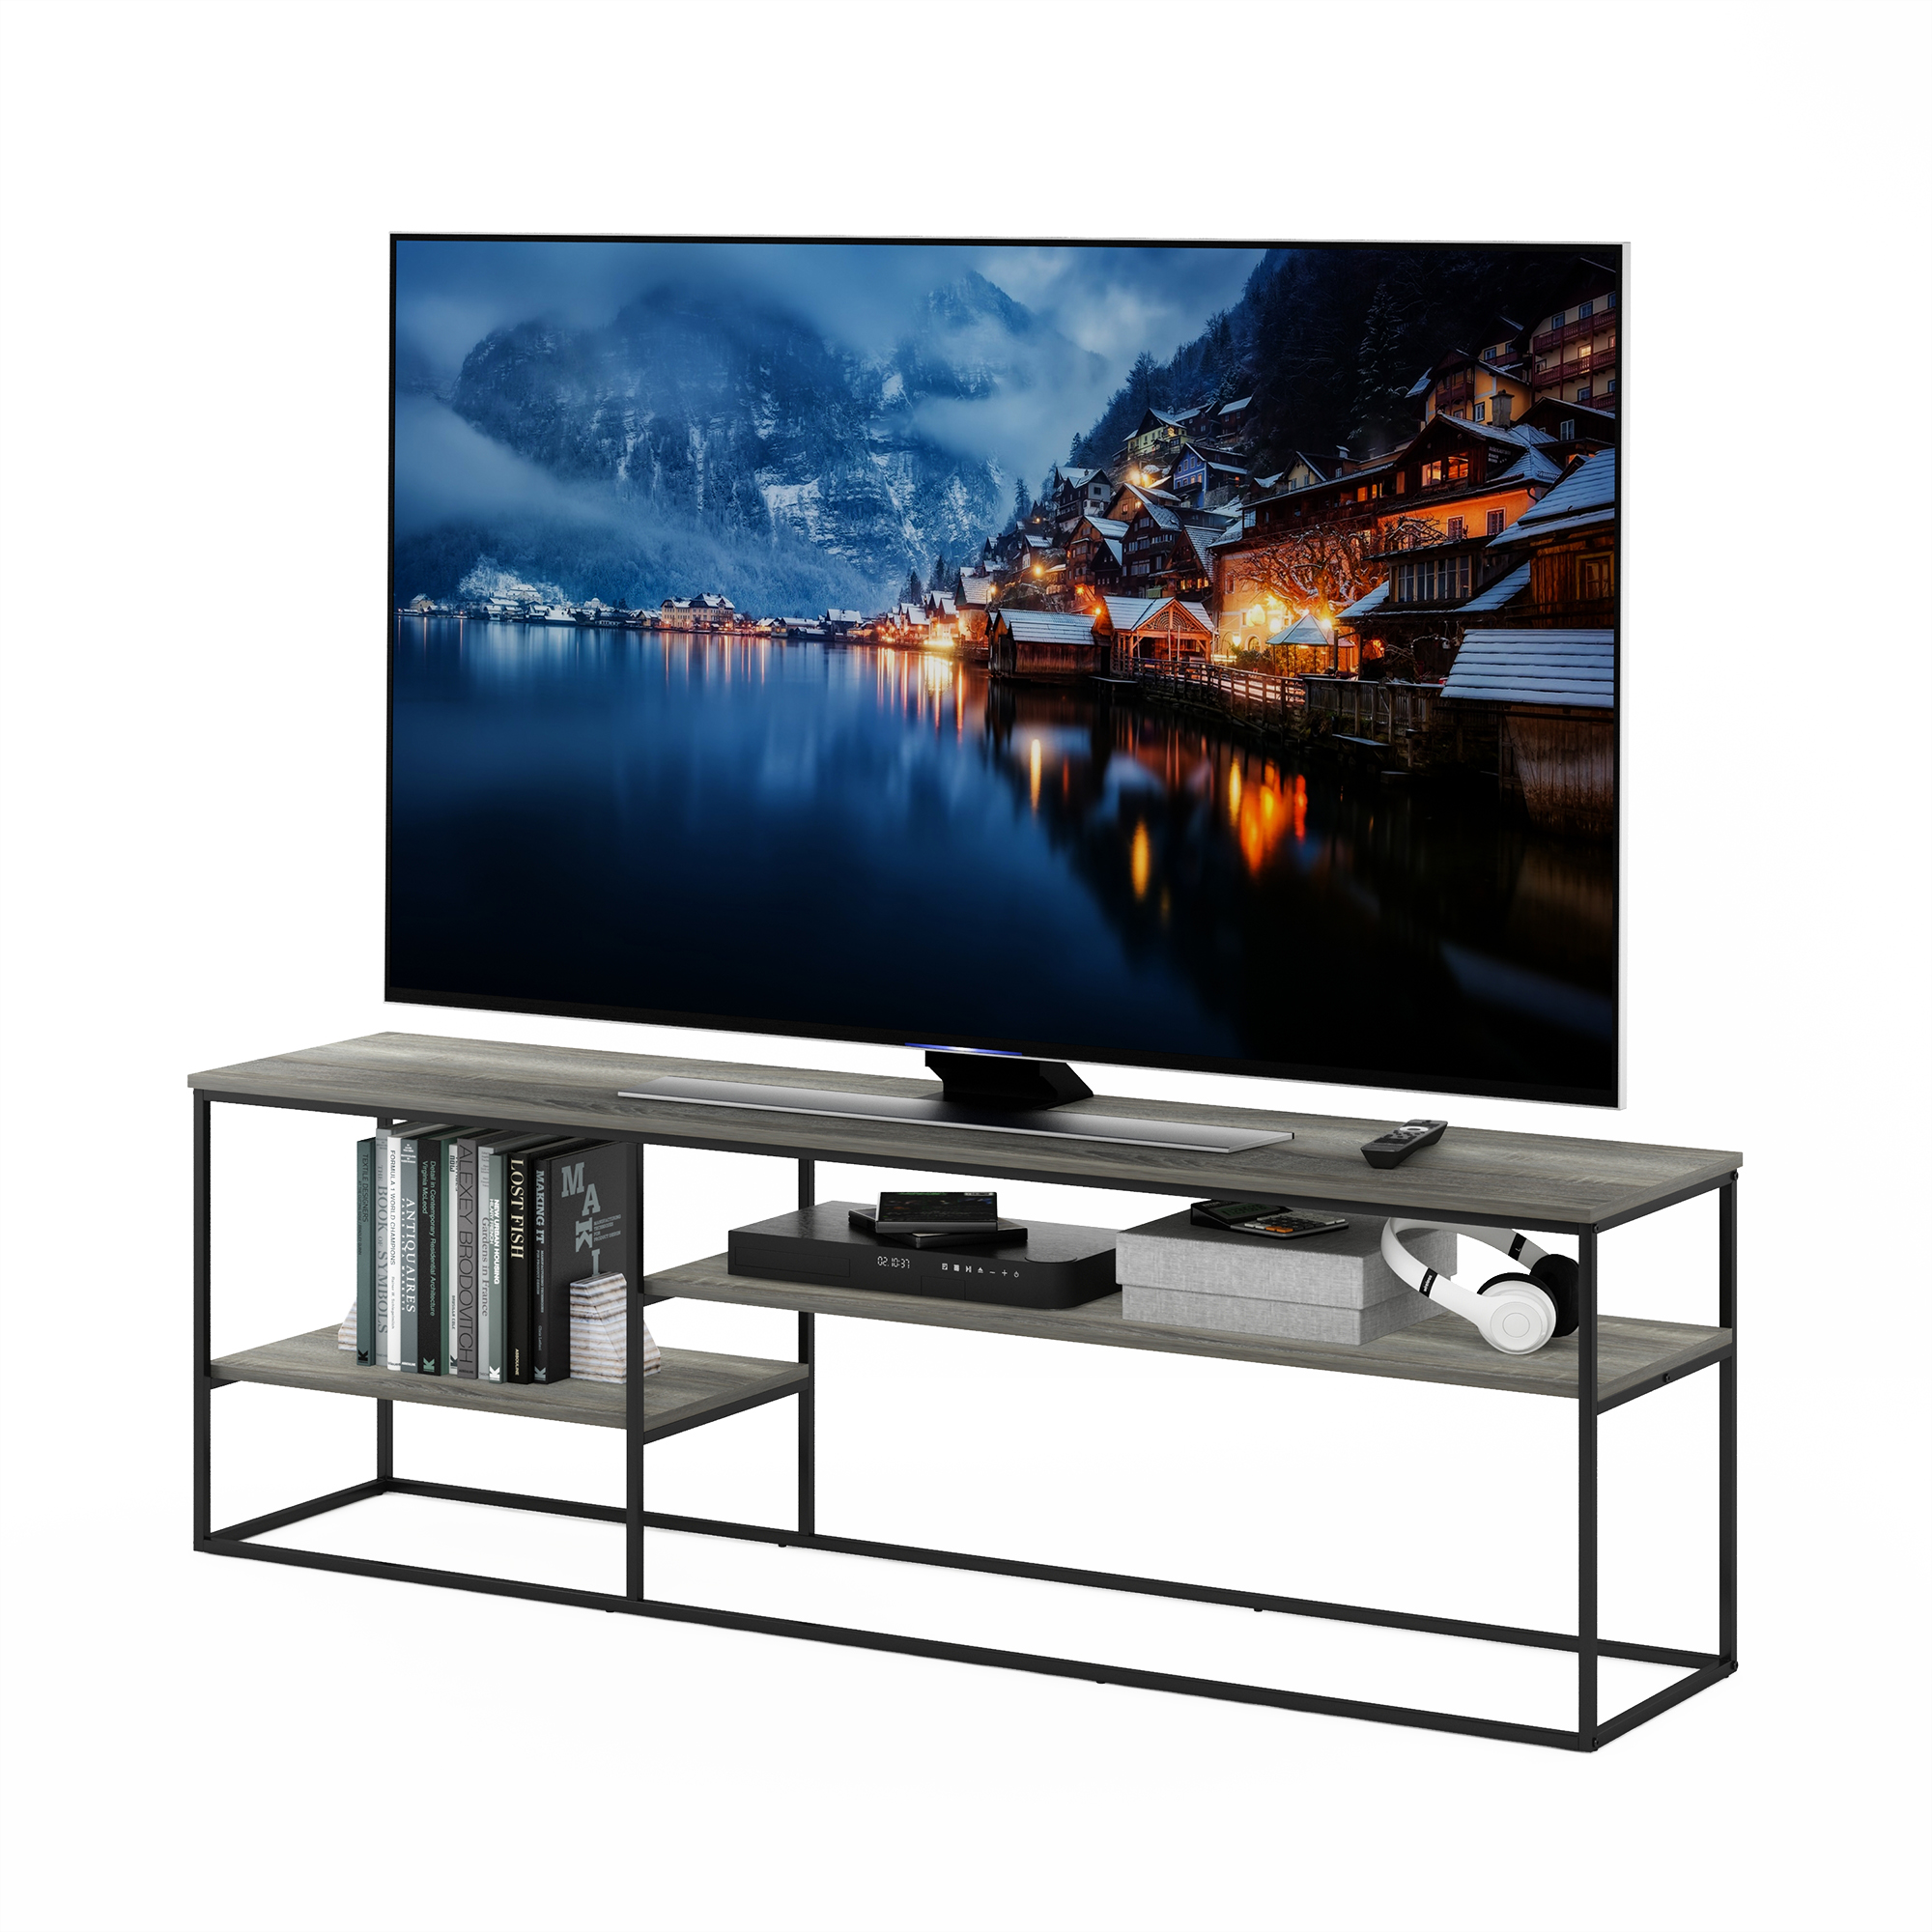 Furinno Moretti Modern Lifestyle TV Stand for TV up to 78 Inch, French Oak Grey - image 1 of 3